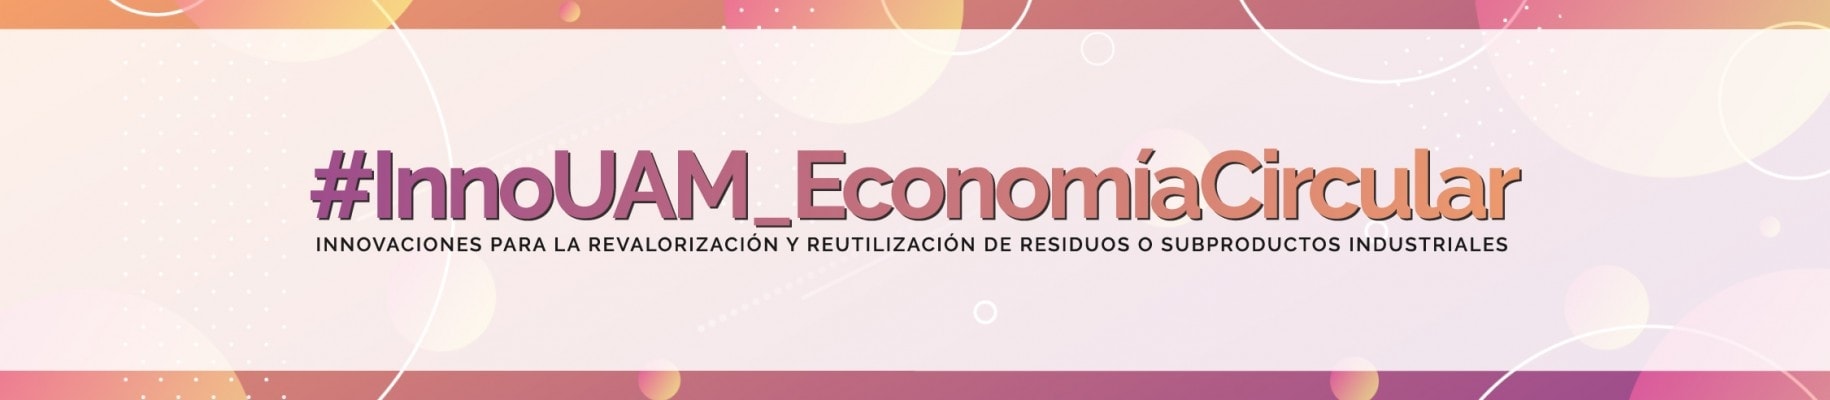 Logo with the name of the event, InnoUAM_EconomíaCircular, in which Ferrovial Servicios participates